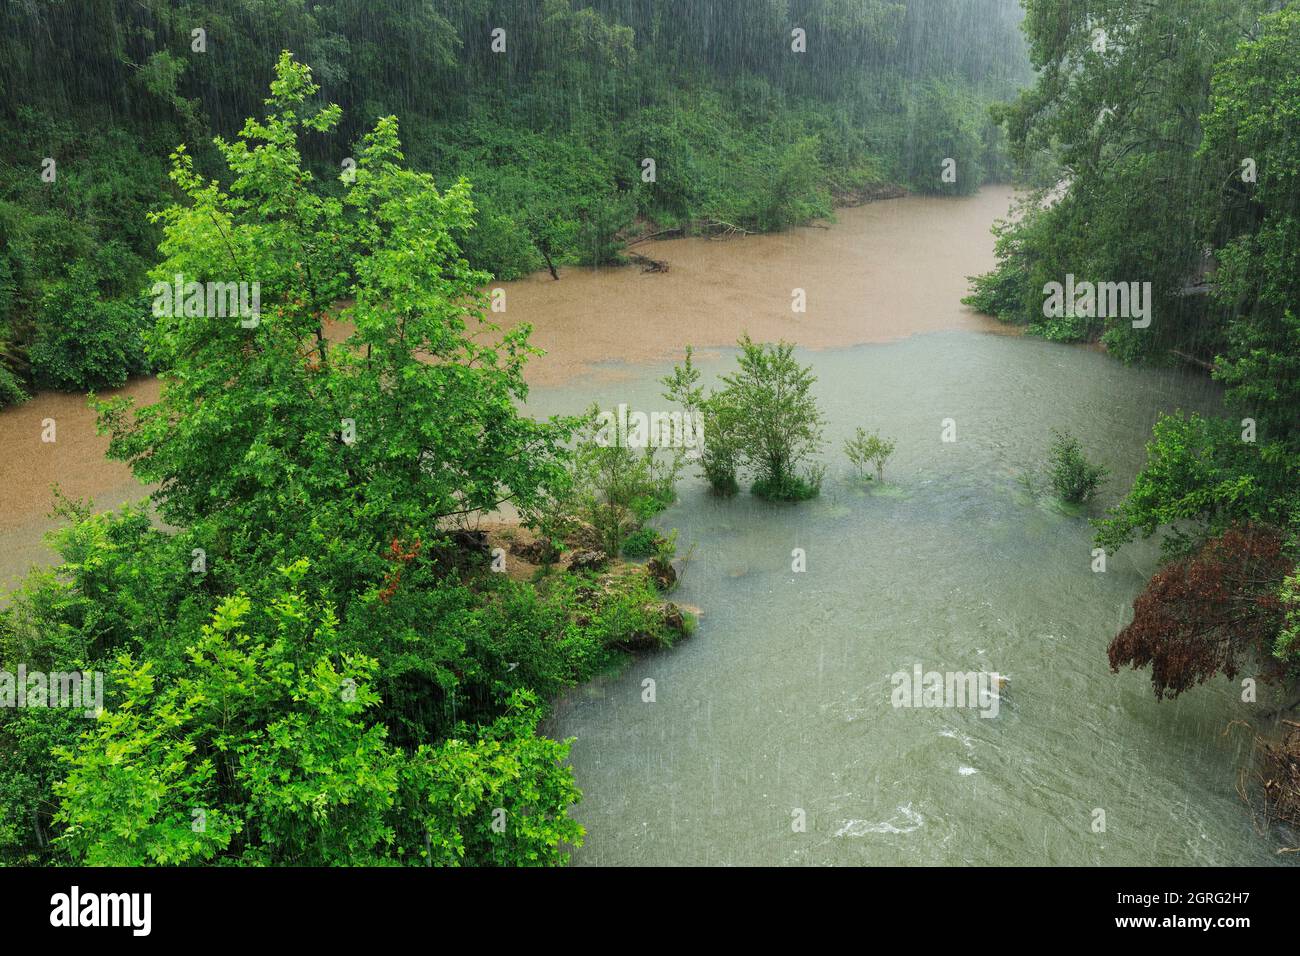 France, Var, Dracenie, Les Arcs sur Argens, the L'Argens river during a thunderstorm, the Tournavelle gorges, confluence with the Aille river Stock Photo